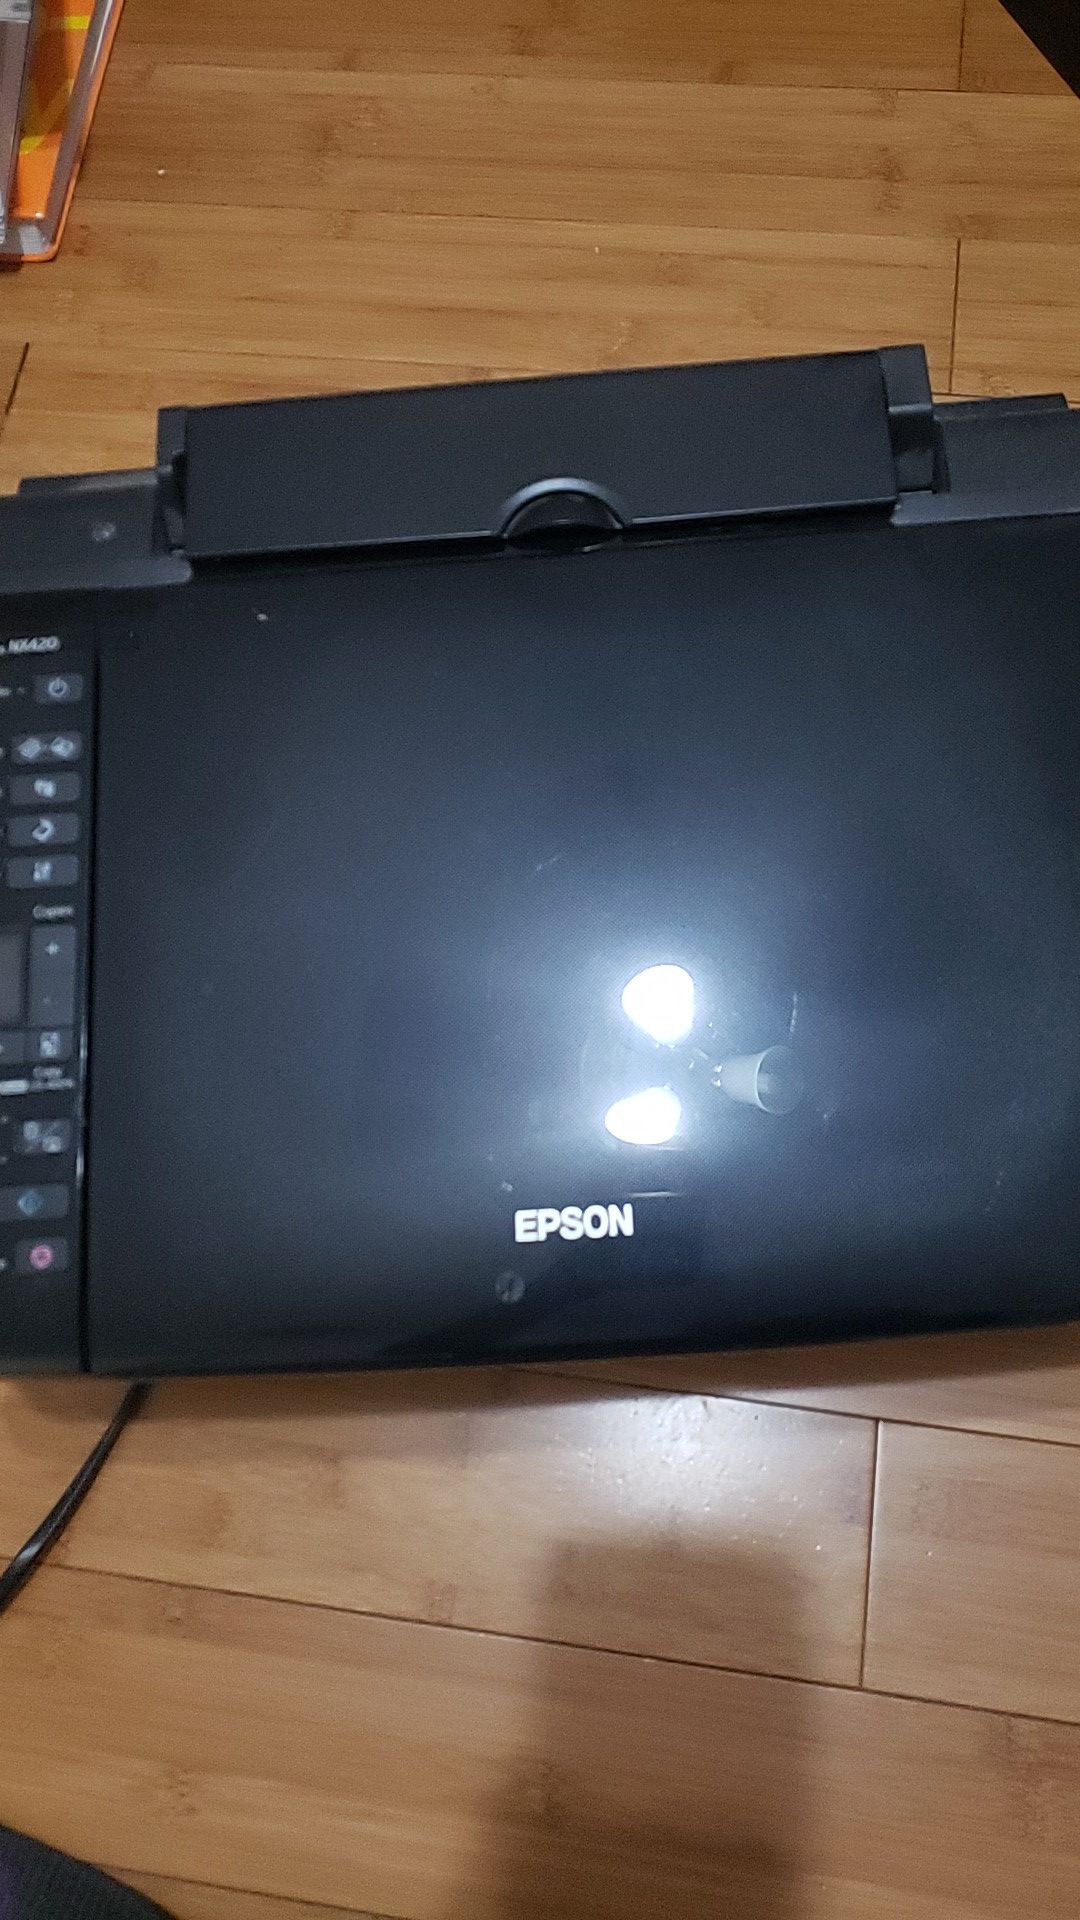 Epson Stylus NX420 Colored Printer and Scanner